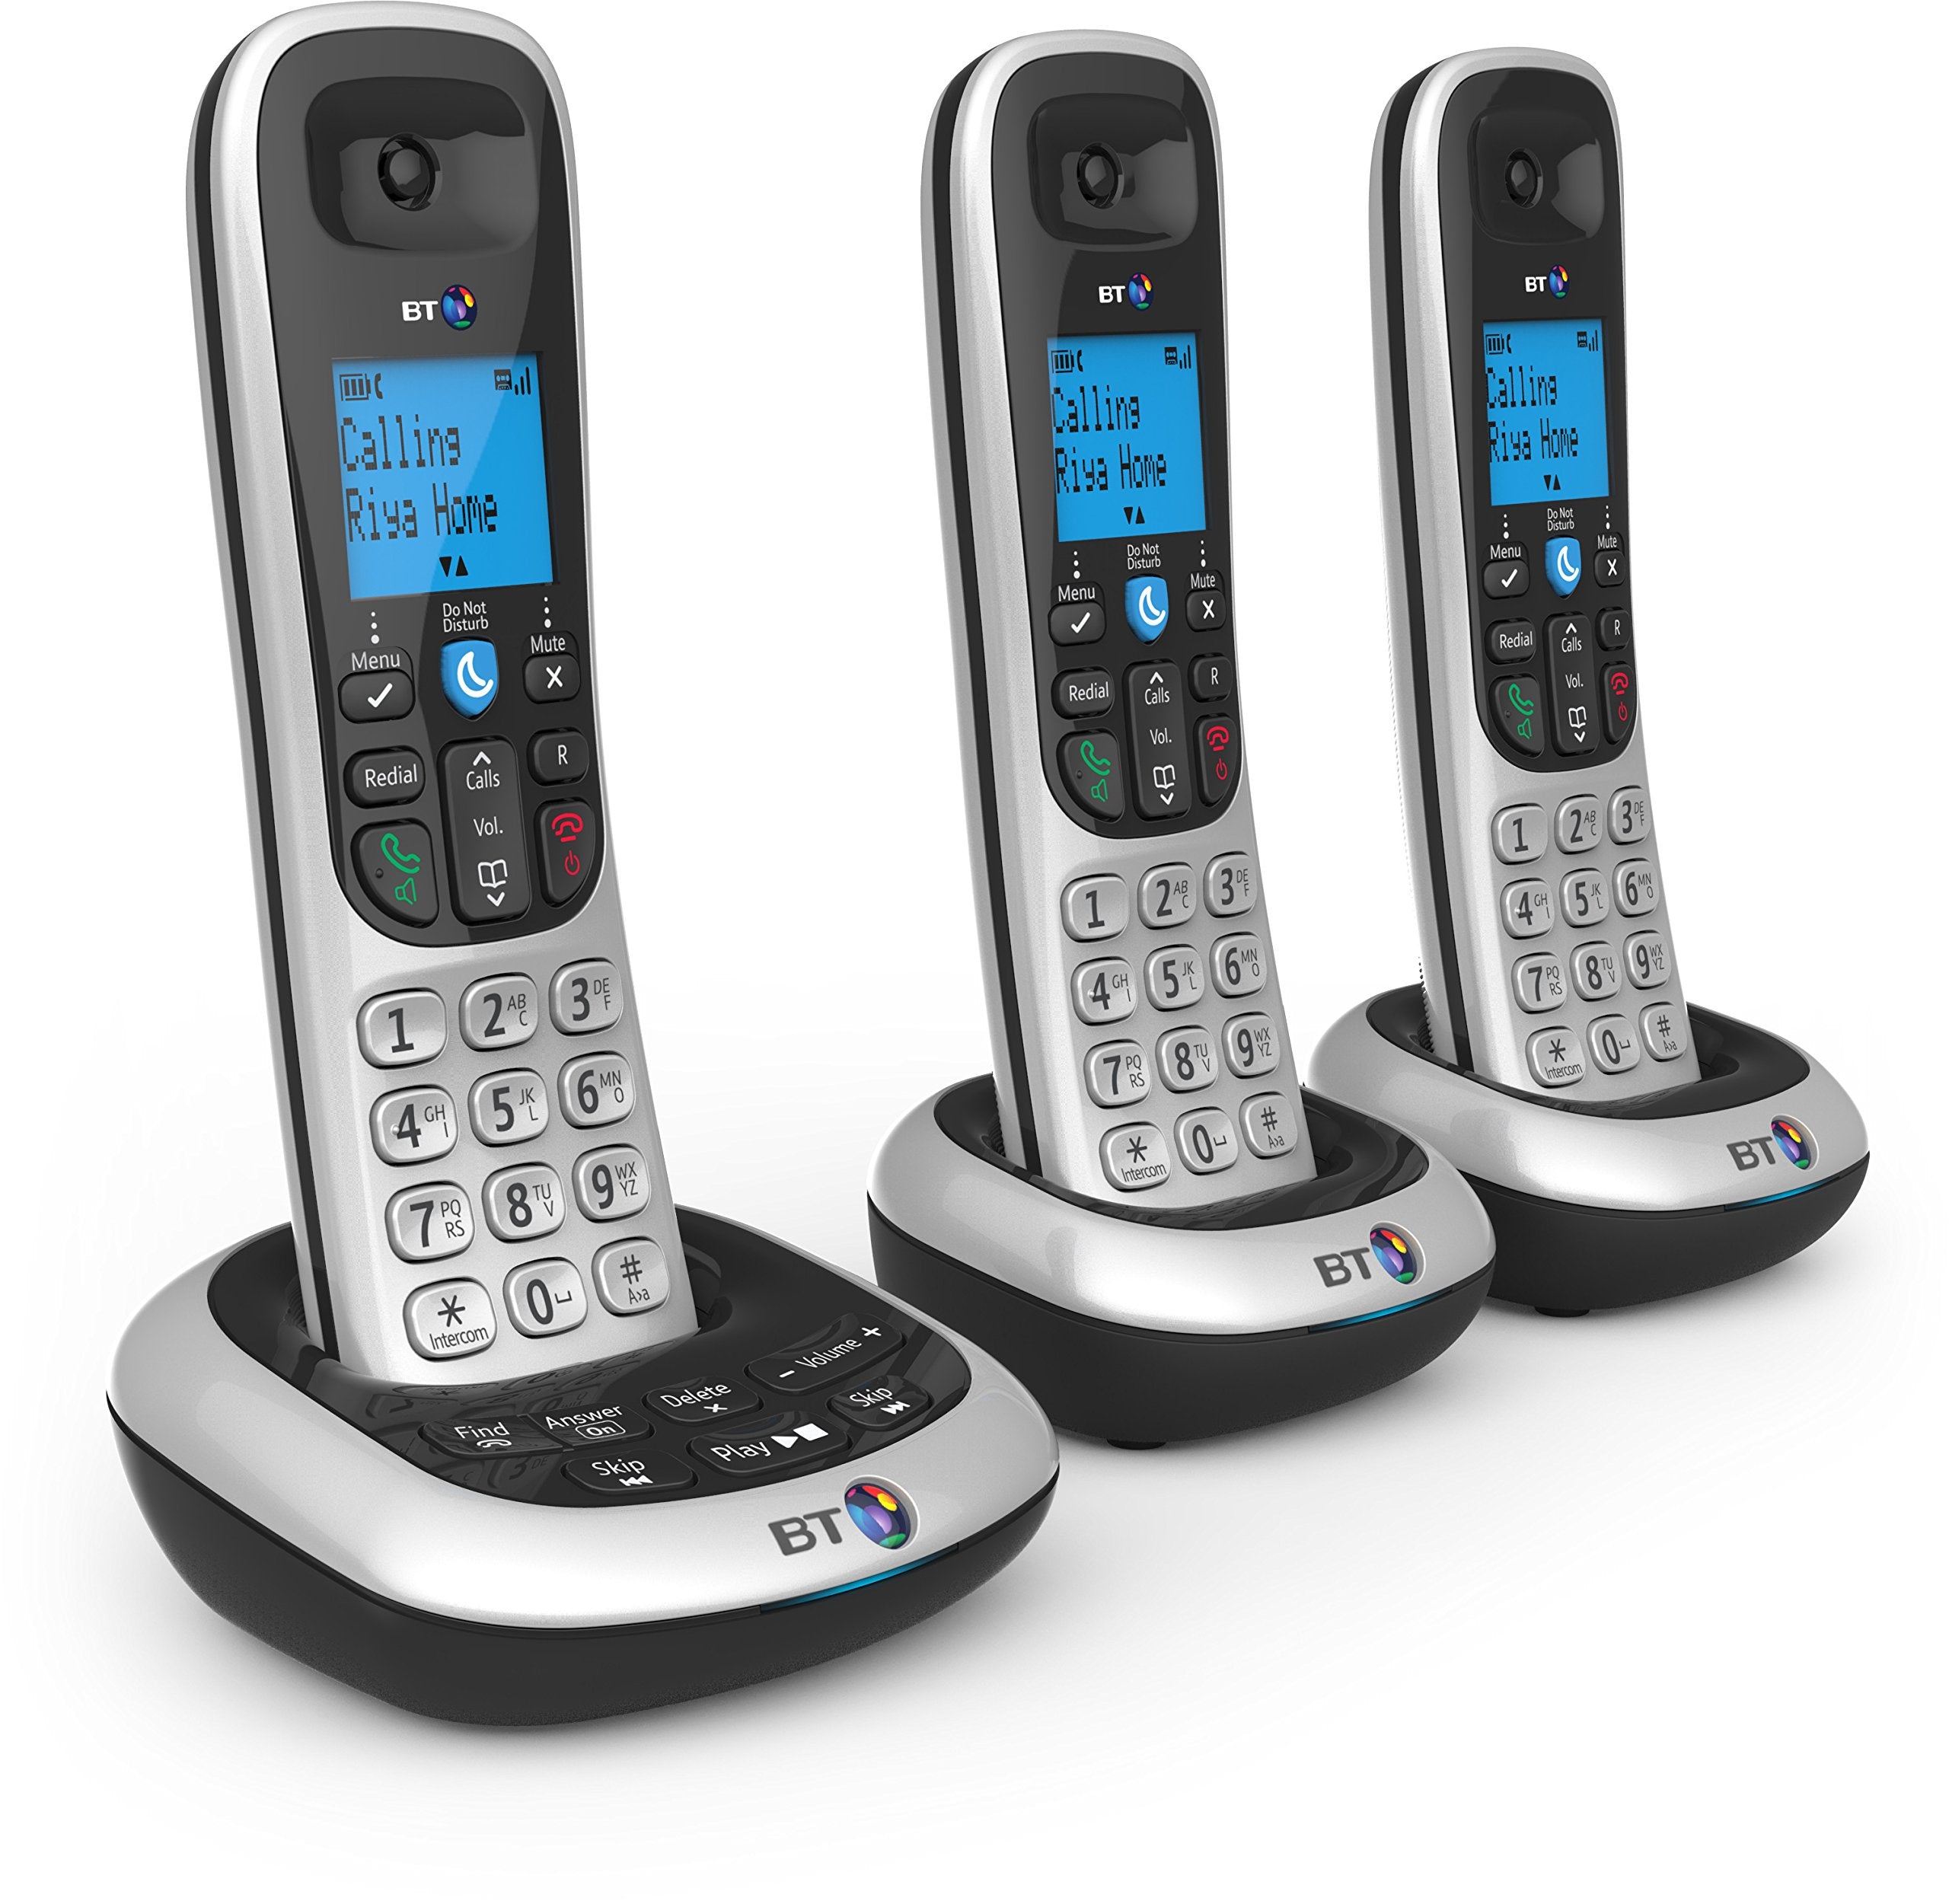 BT 2700 Nuisance Call Blocker Cordless Home Phone with Digital Answer Machine - Trio Handset Pack